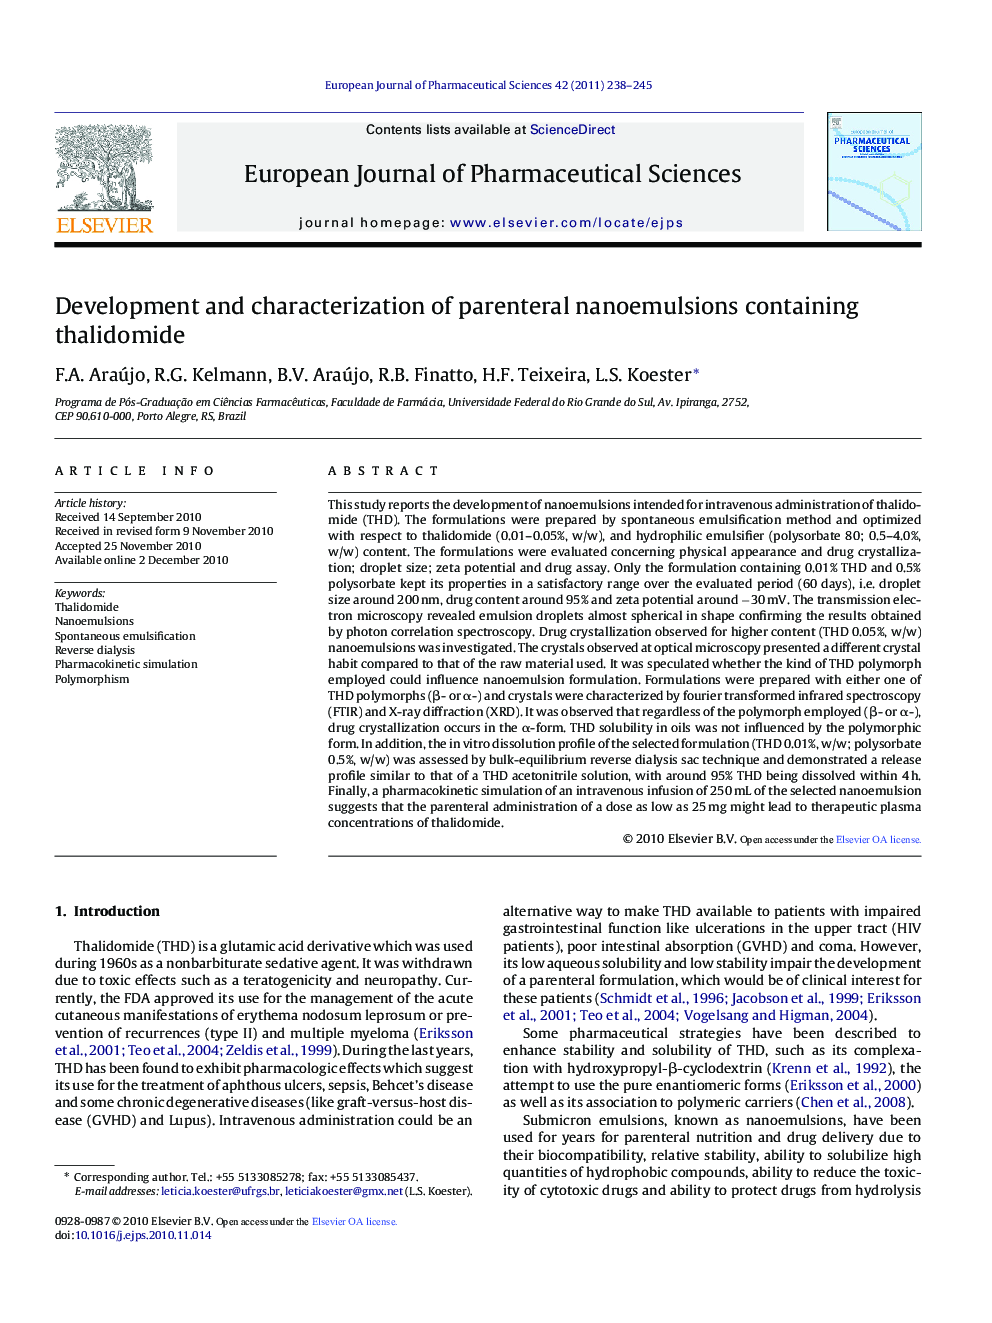 Development and characterization of parenteral nanoemulsions containing thalidomide